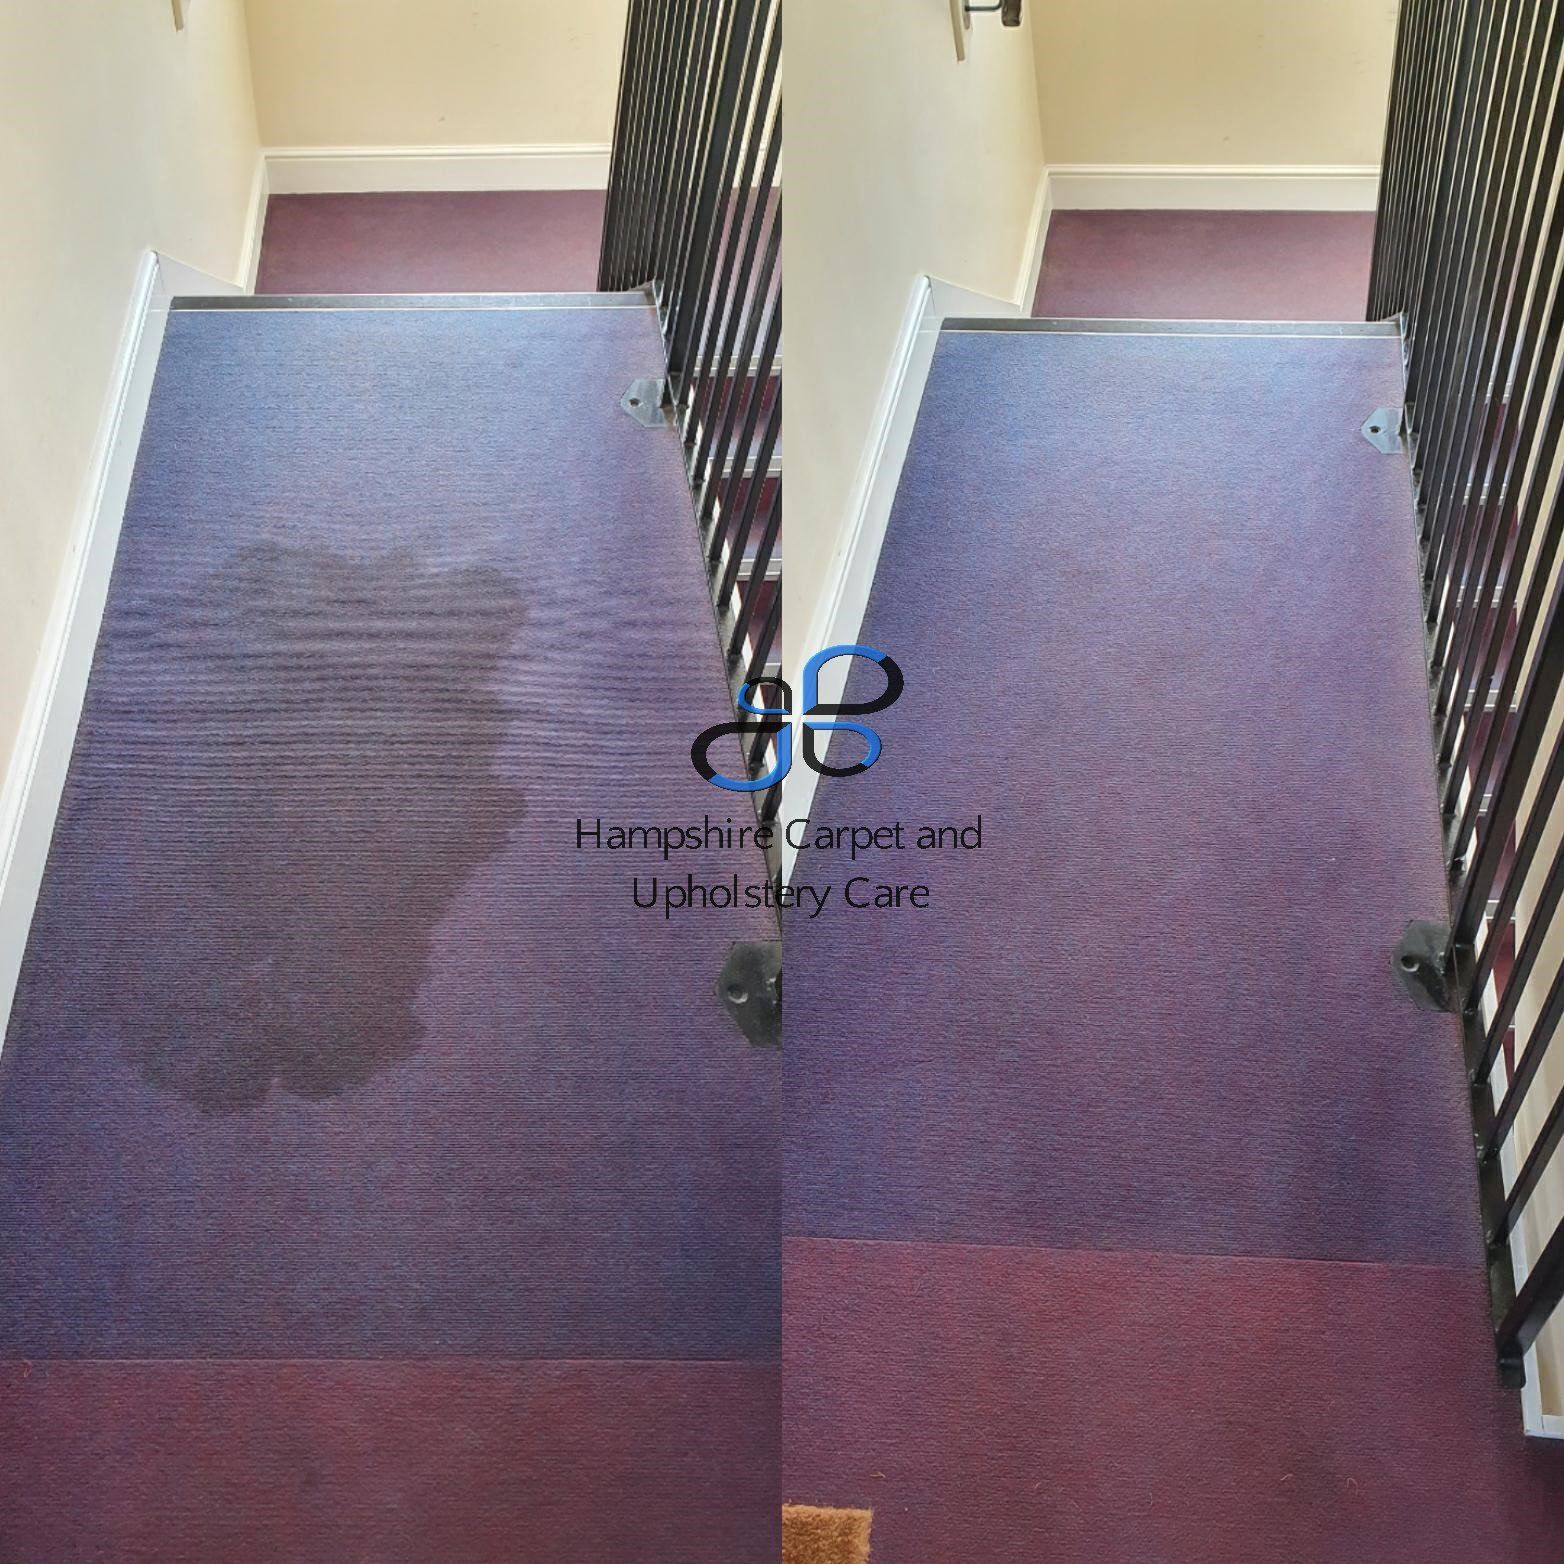 Property services carpet Cleaning Hampshire